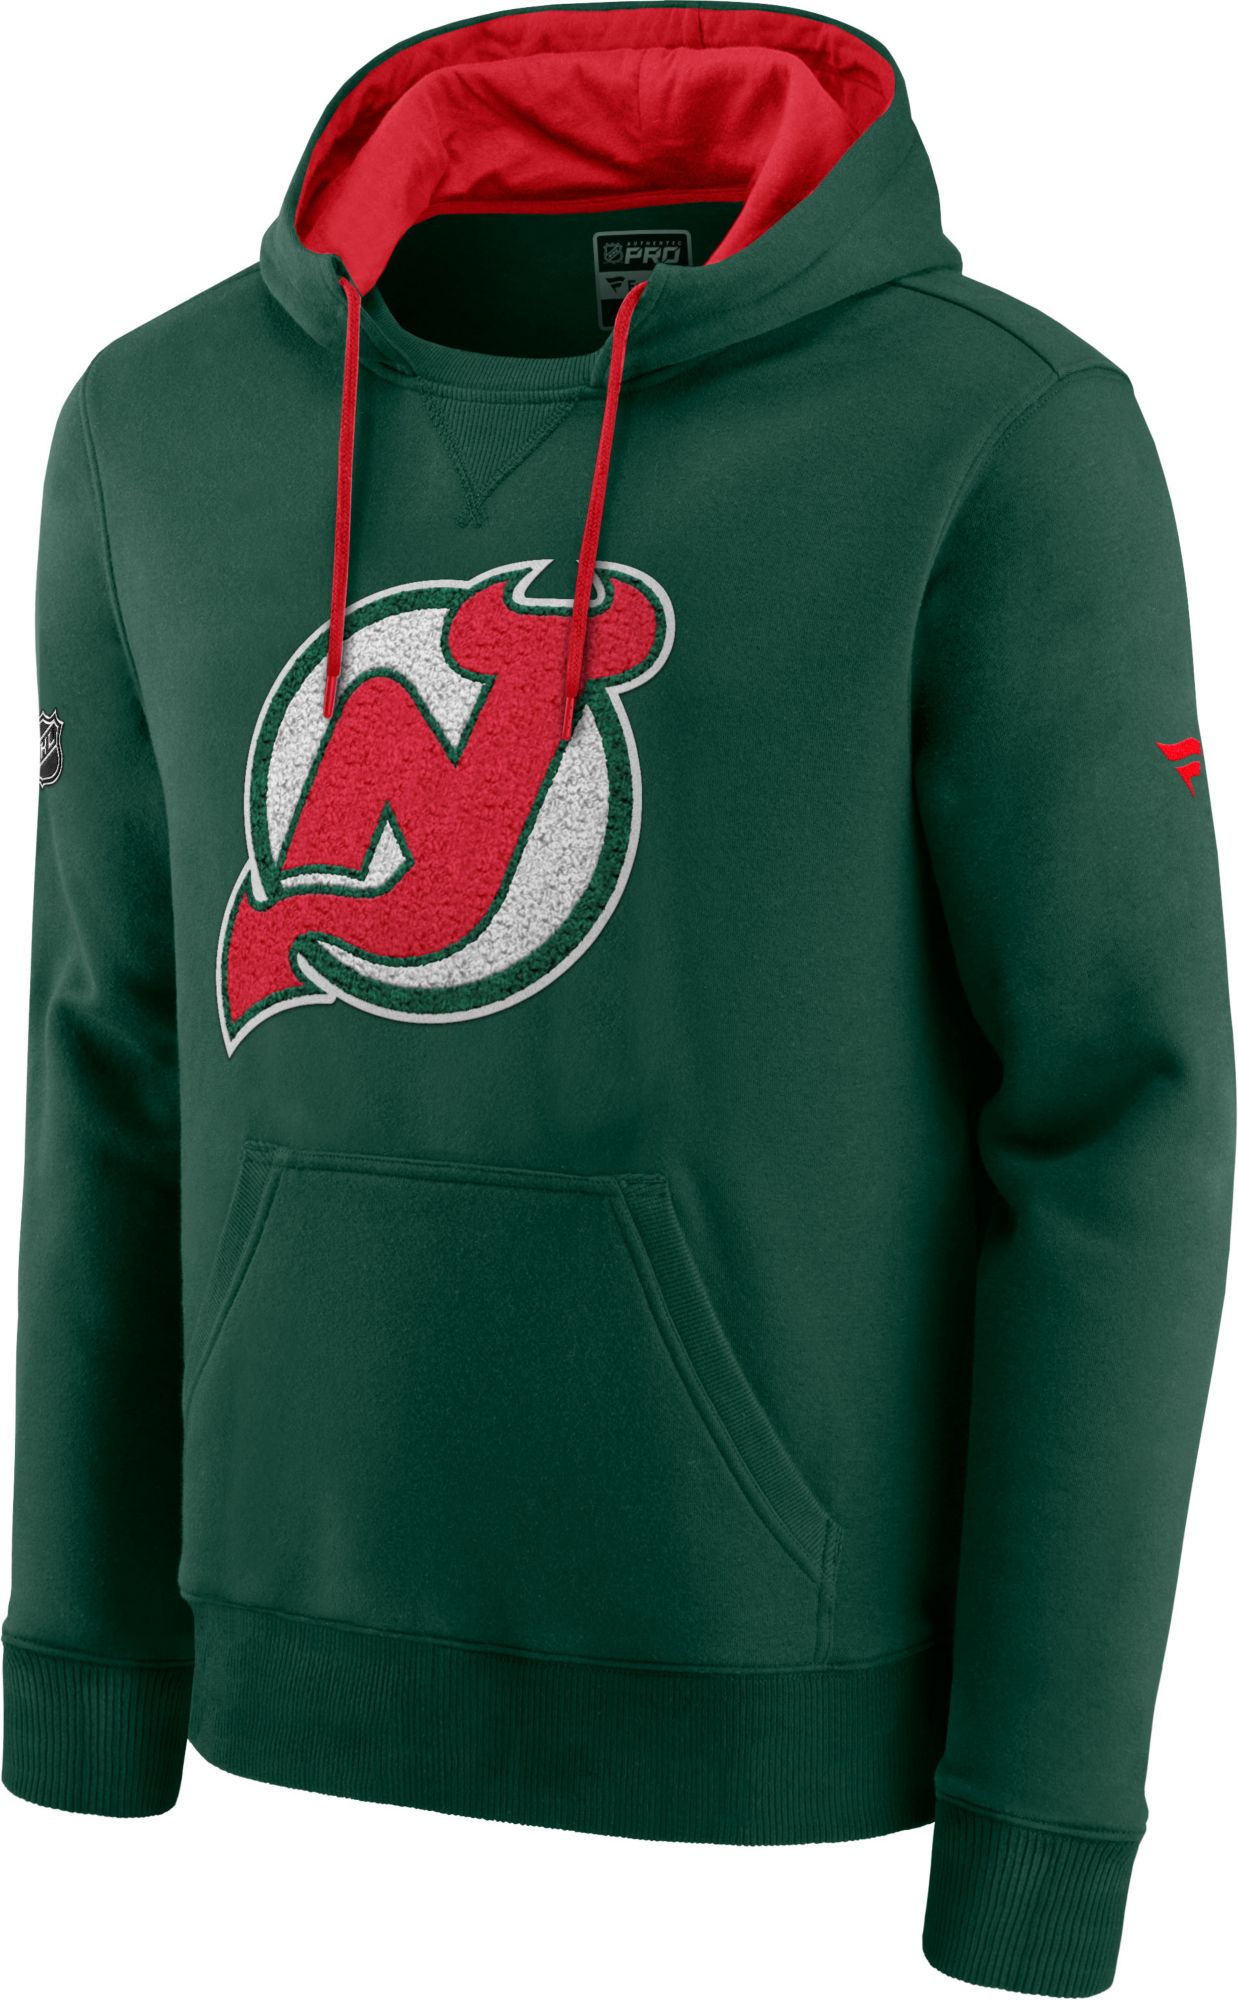 Men's New Jersey Devils Fanatics Branded Green/Red Special Edition Archival  Throwback Pullover Hoodie